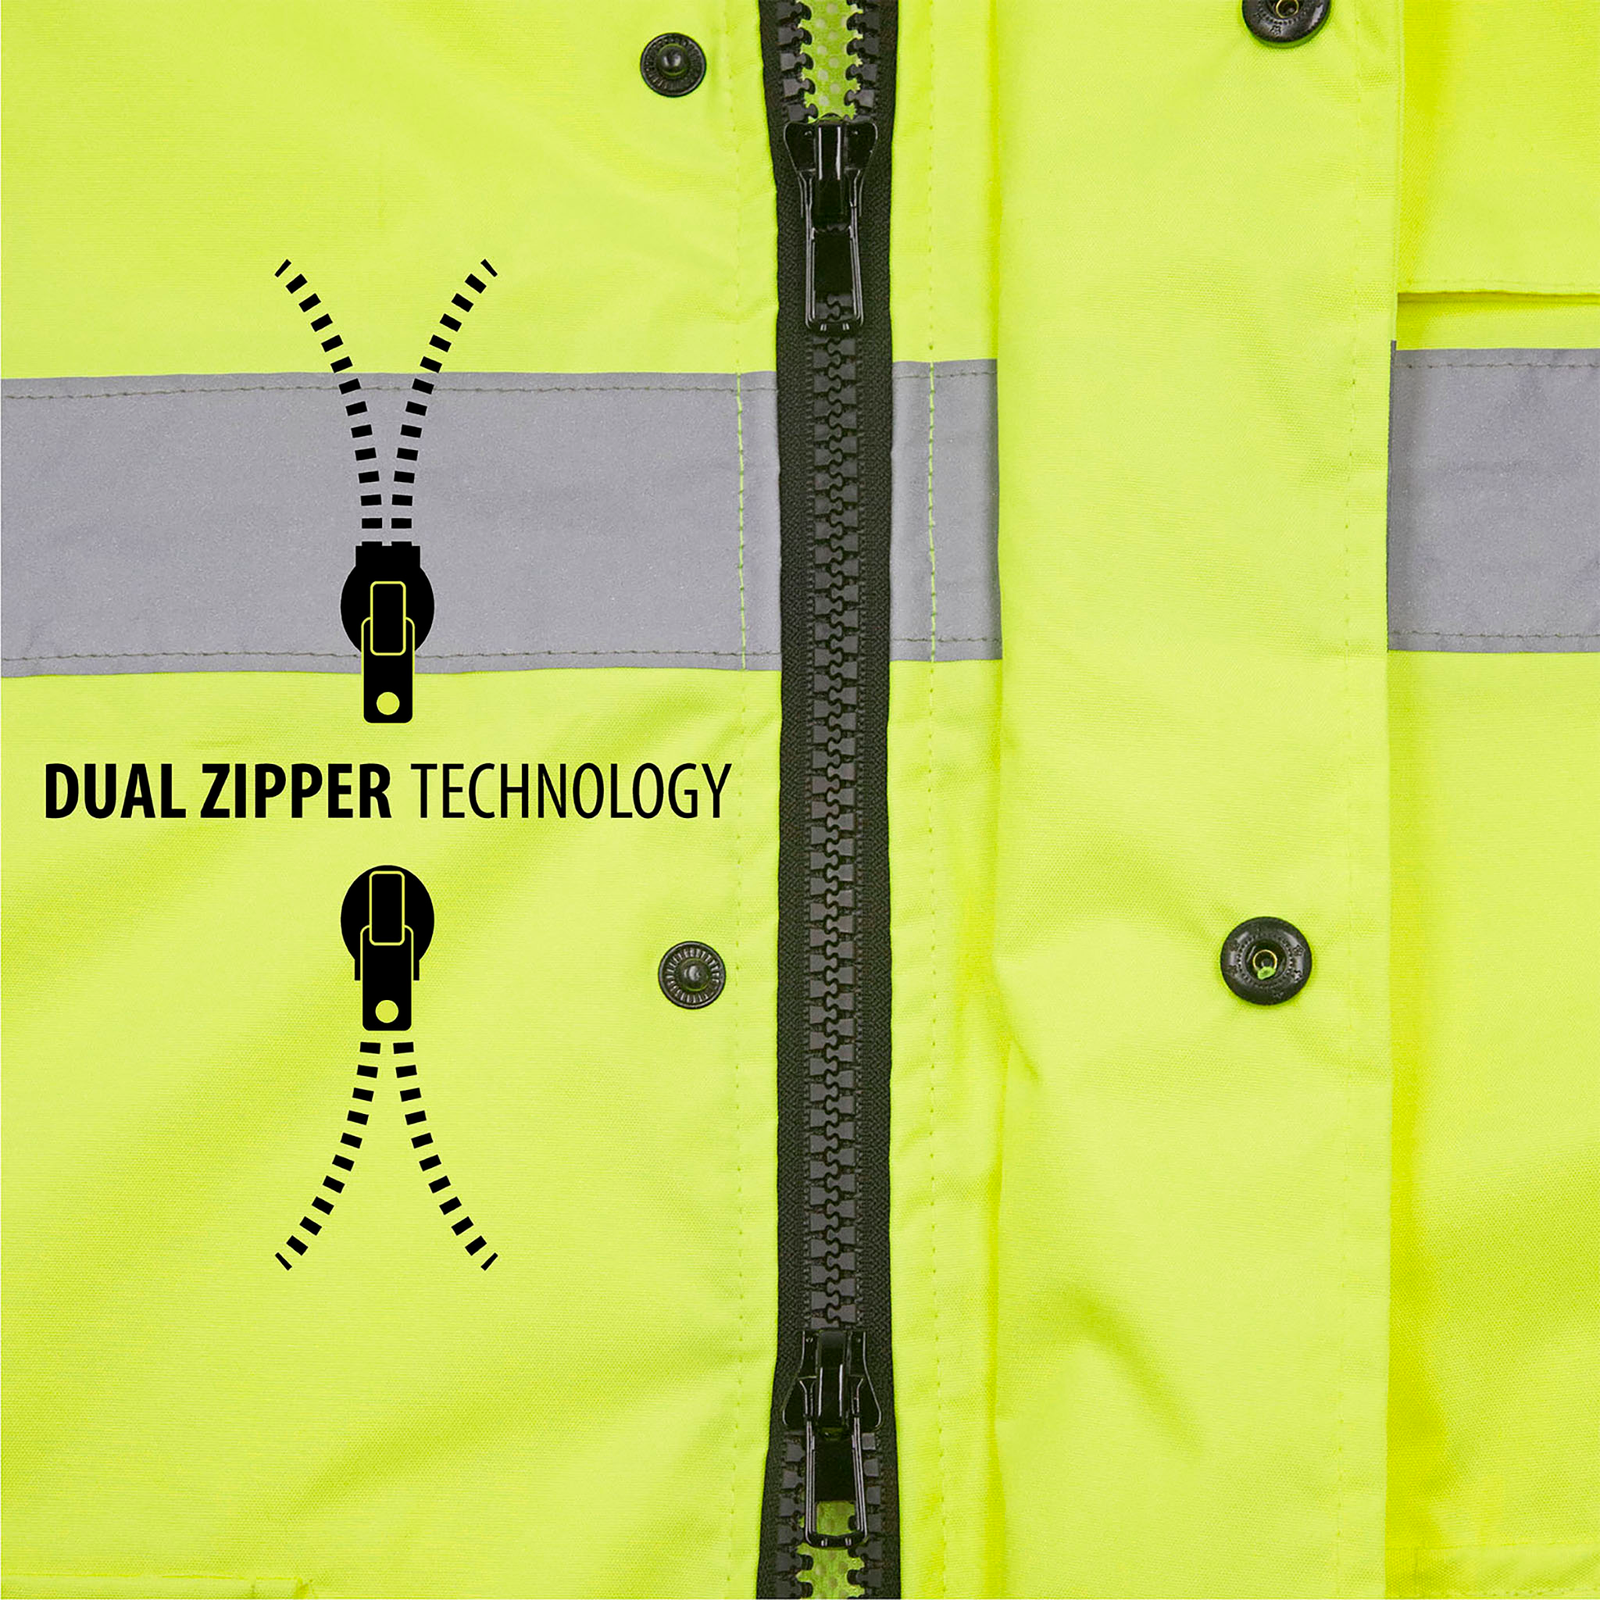 Close of the tow way zipper. Features that zipper opens from the bottom up and from the top down.